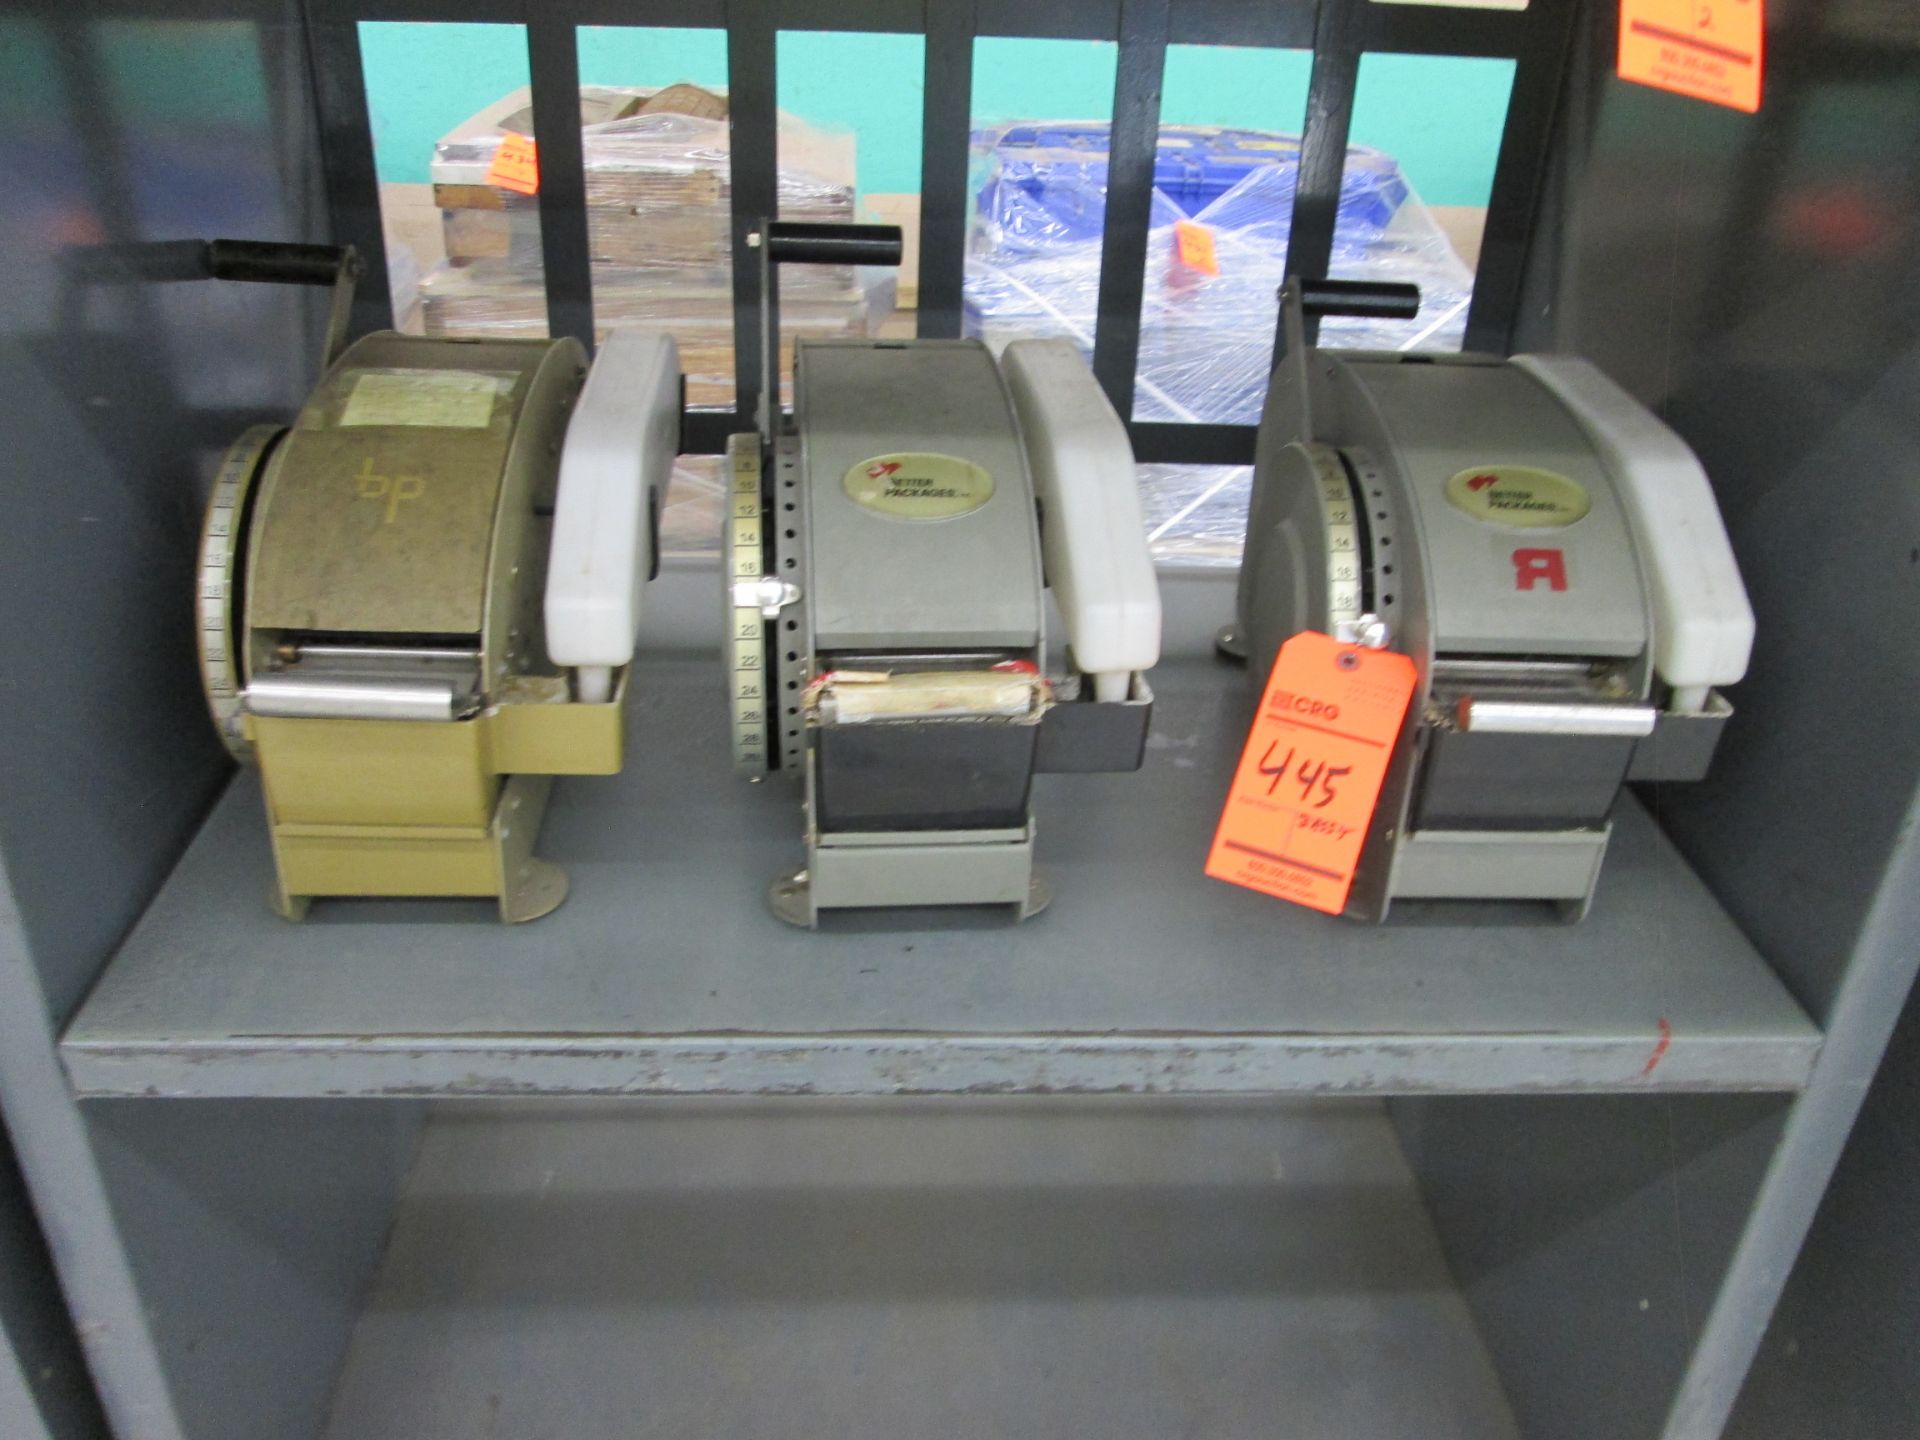 Lot of (3) ass't BetterPack manual tape dispensers - no cart - LOCATED AT 524 ROUTE 7 SO., MILTON,